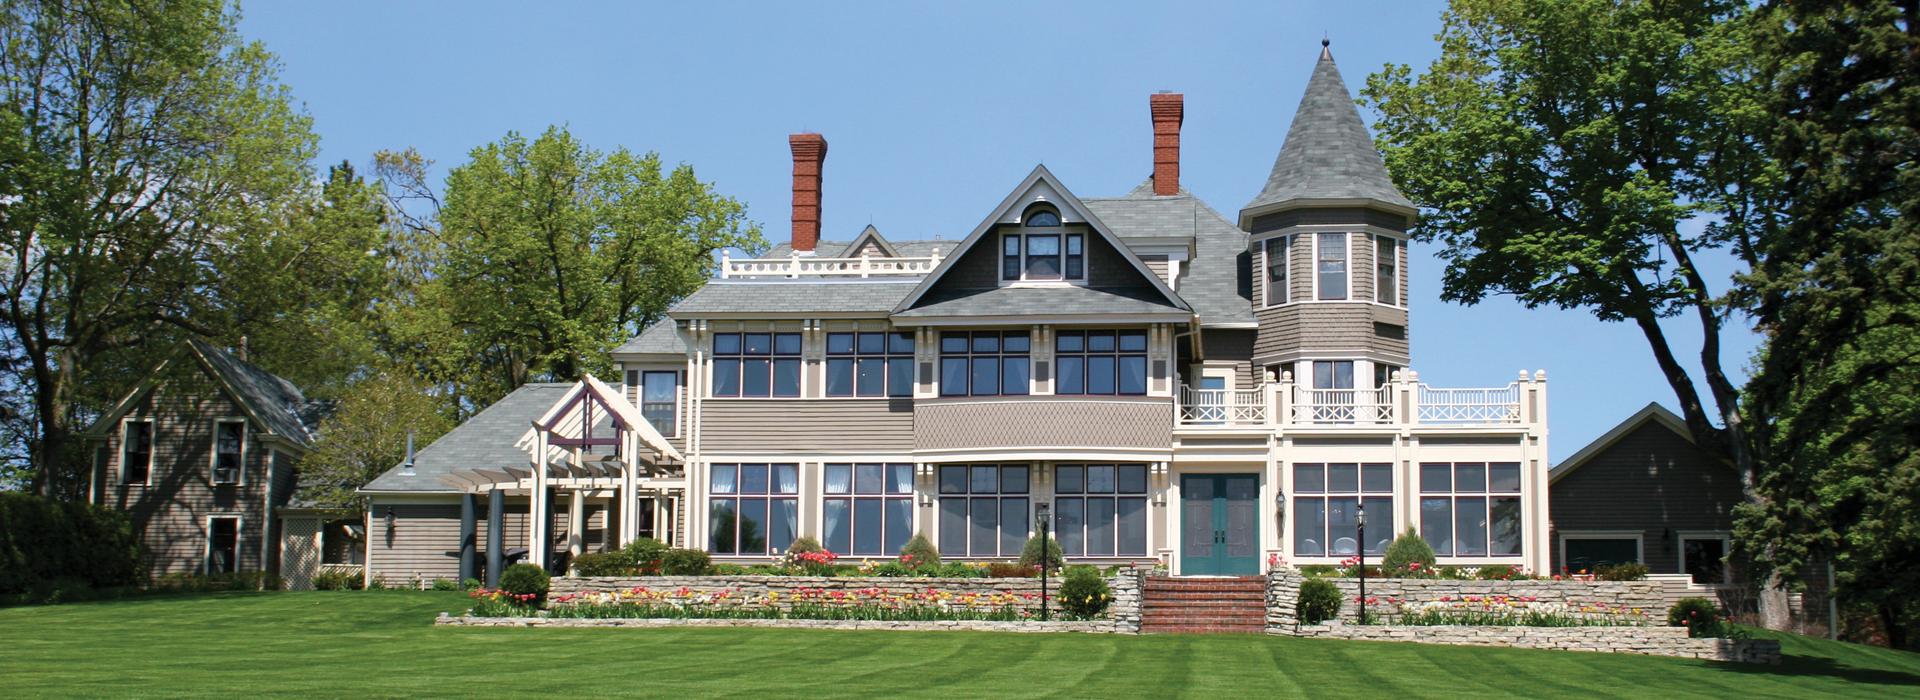 Colonial home with grey exterior, large windows, and manicured lawn with flowers